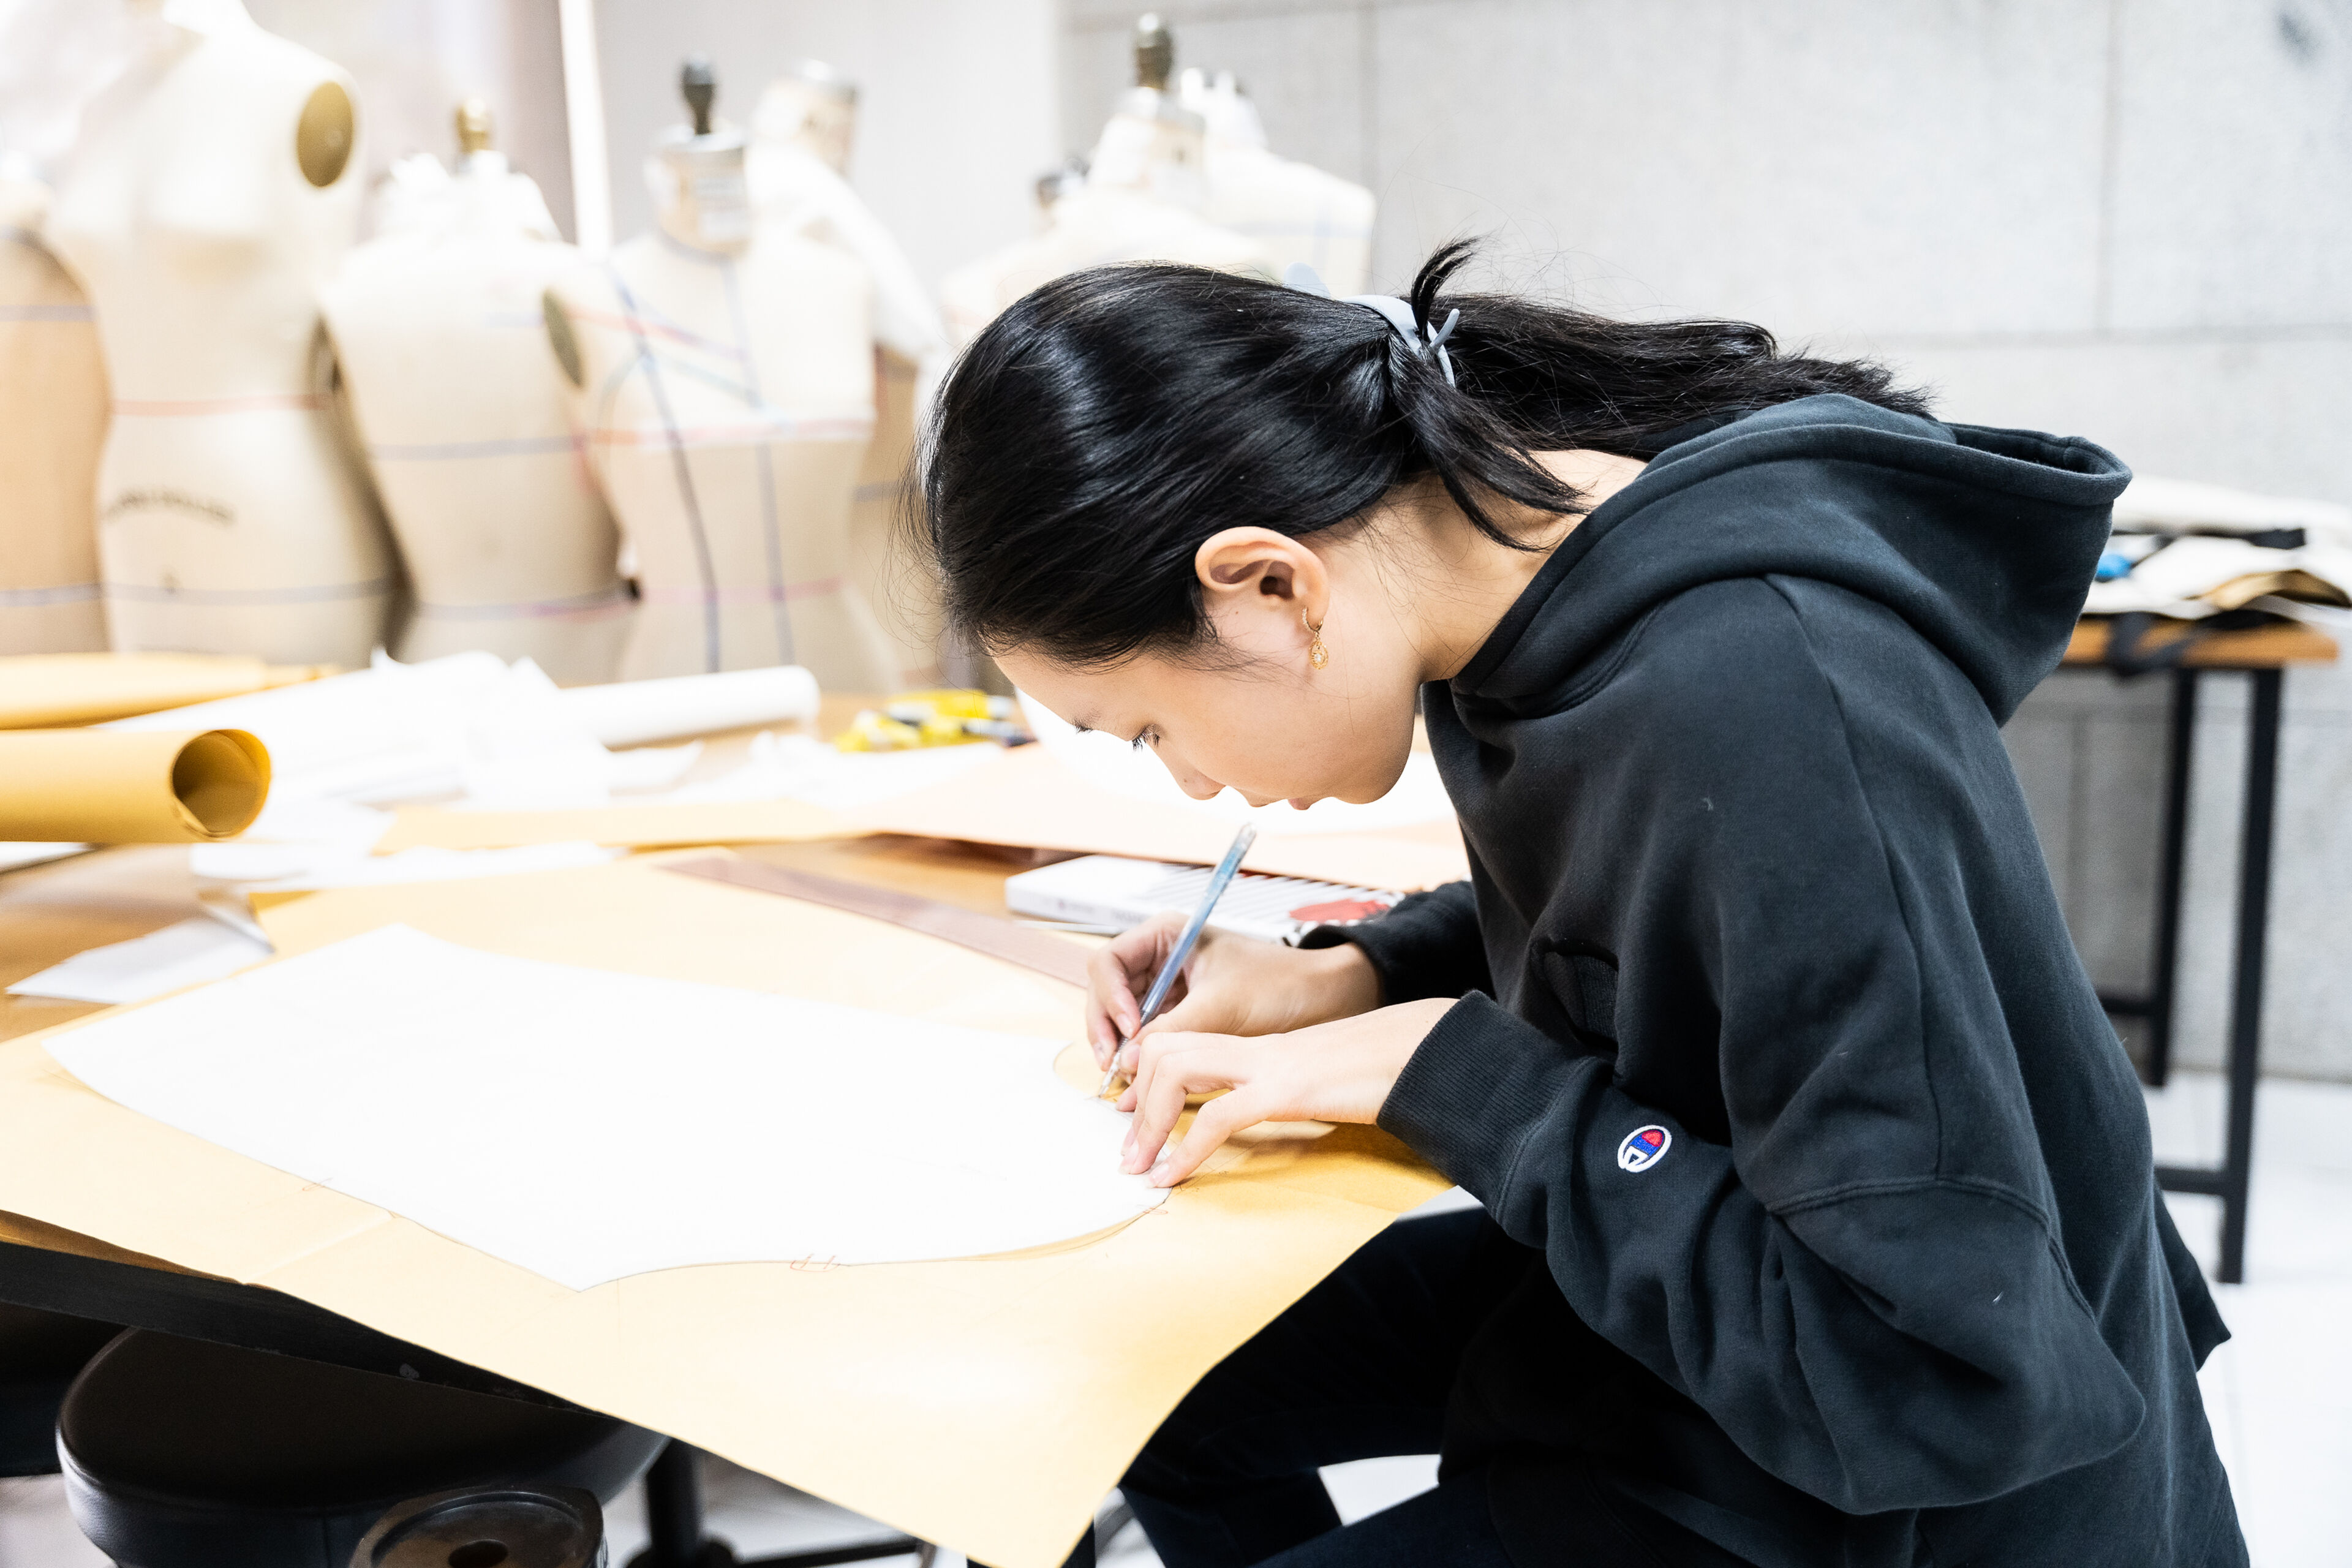 A focused fashion designer is meticulously drafting clothing patterns on a large paper at a well-lit workshop table, with mannequins and design tools in the background.